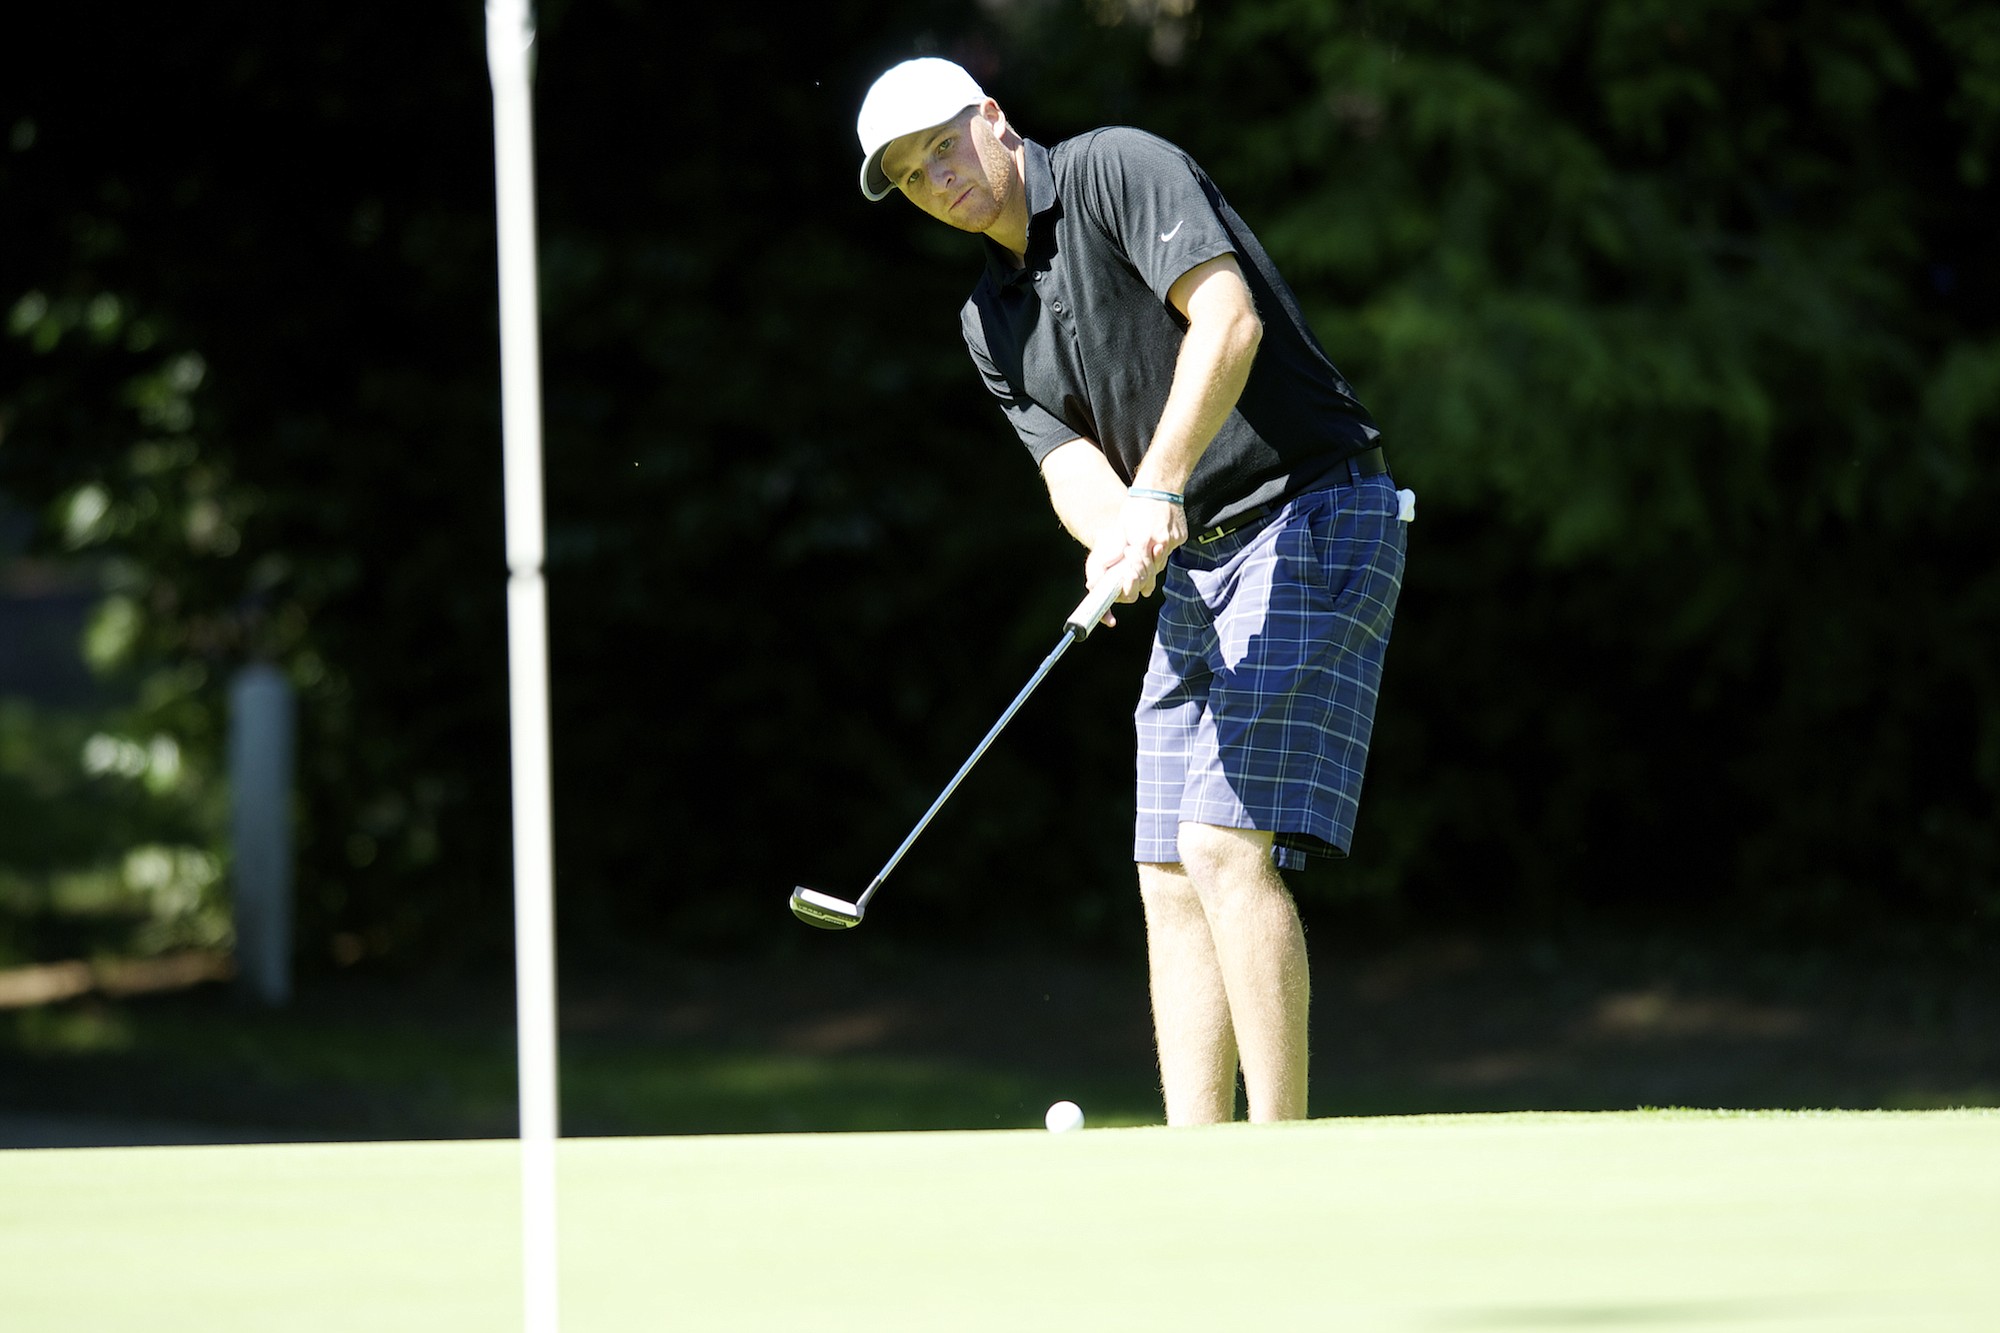 Jesse Heinly plays in the 2015 Royal Oaks Invitational, Friday, June 5, 2015.